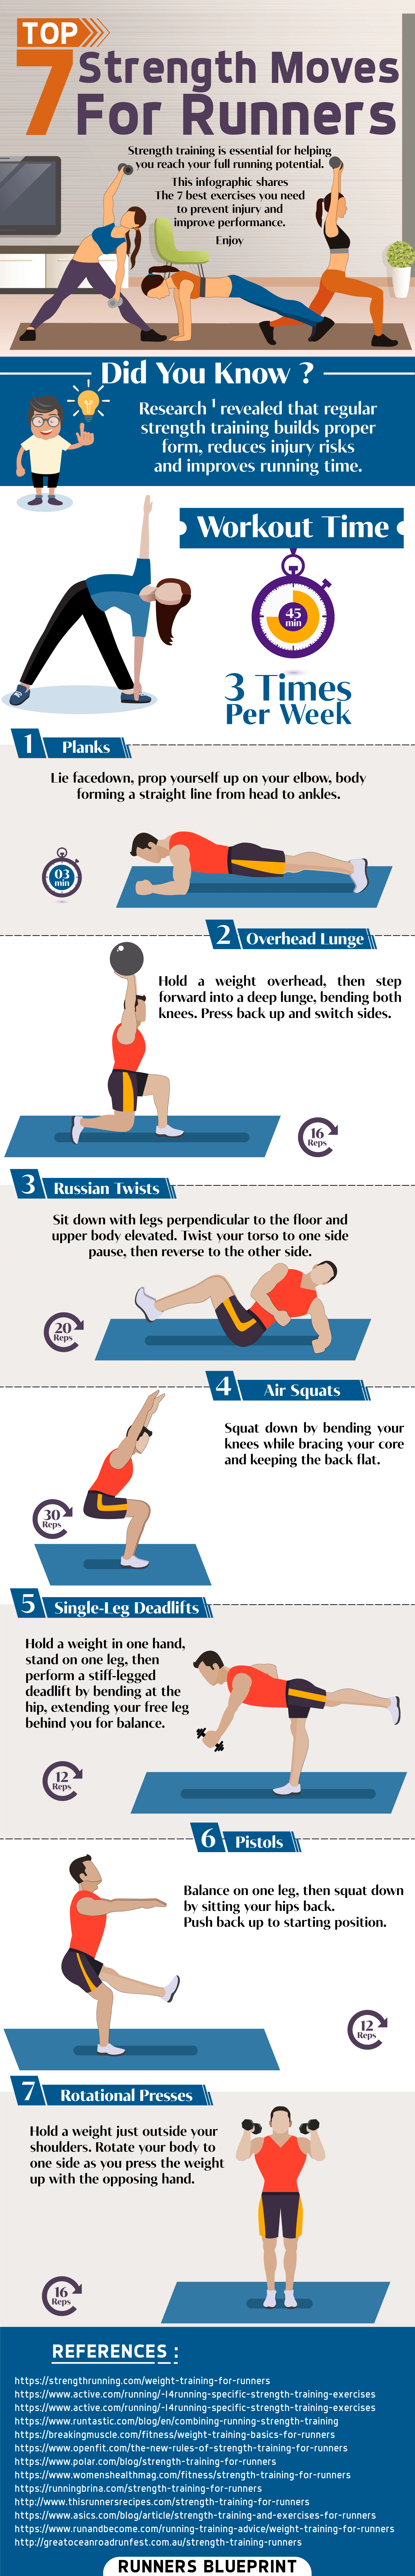 III. Common Mistakes to Avoid when Performing Strength Exercises for Runners